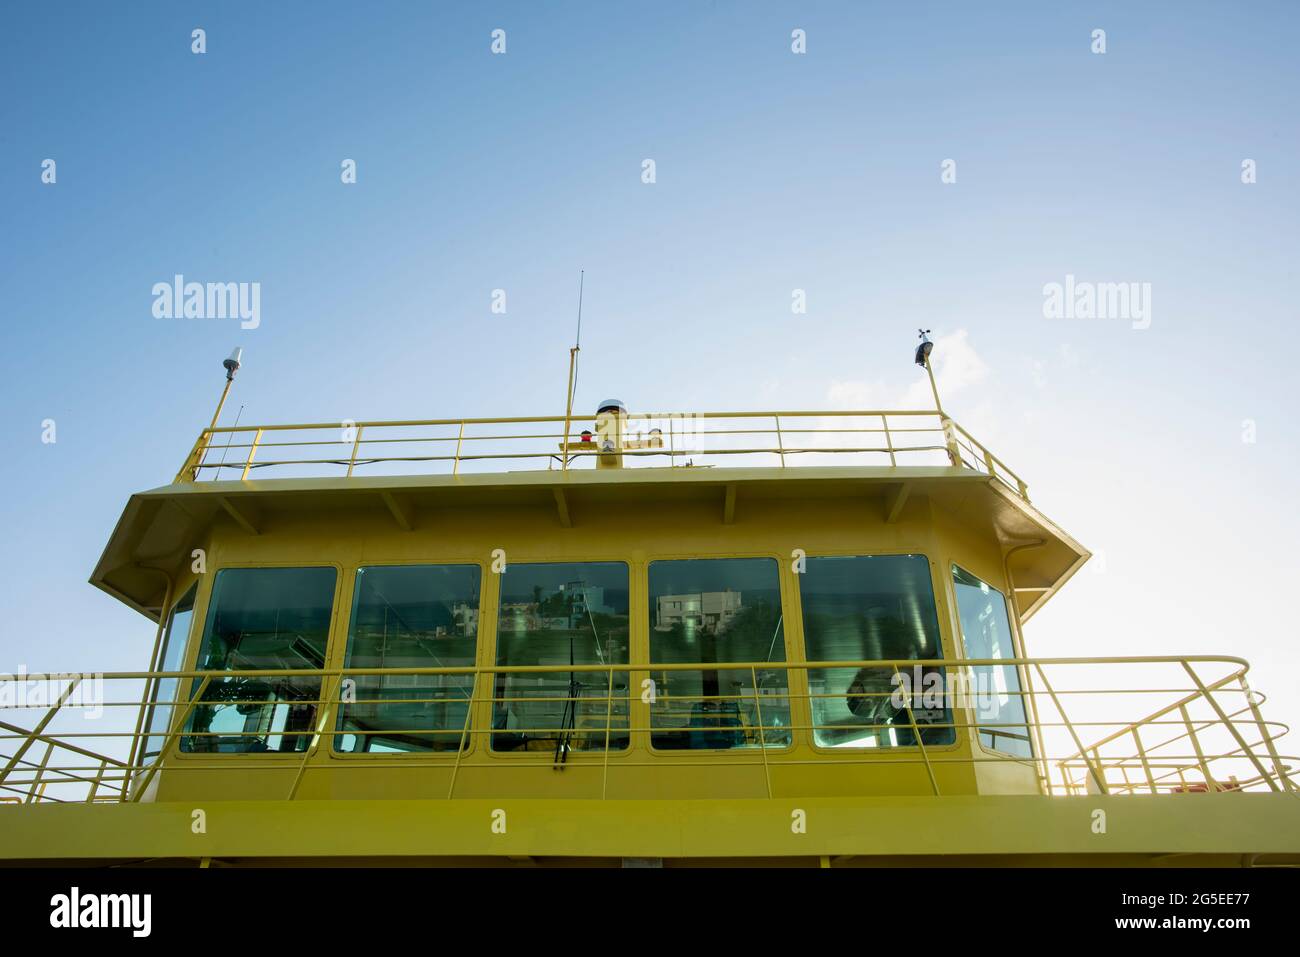 RoRo ferry ship deck for navigation and control, the ship preparing to sail in the Caribbean Sea, Mexico Stock Photo